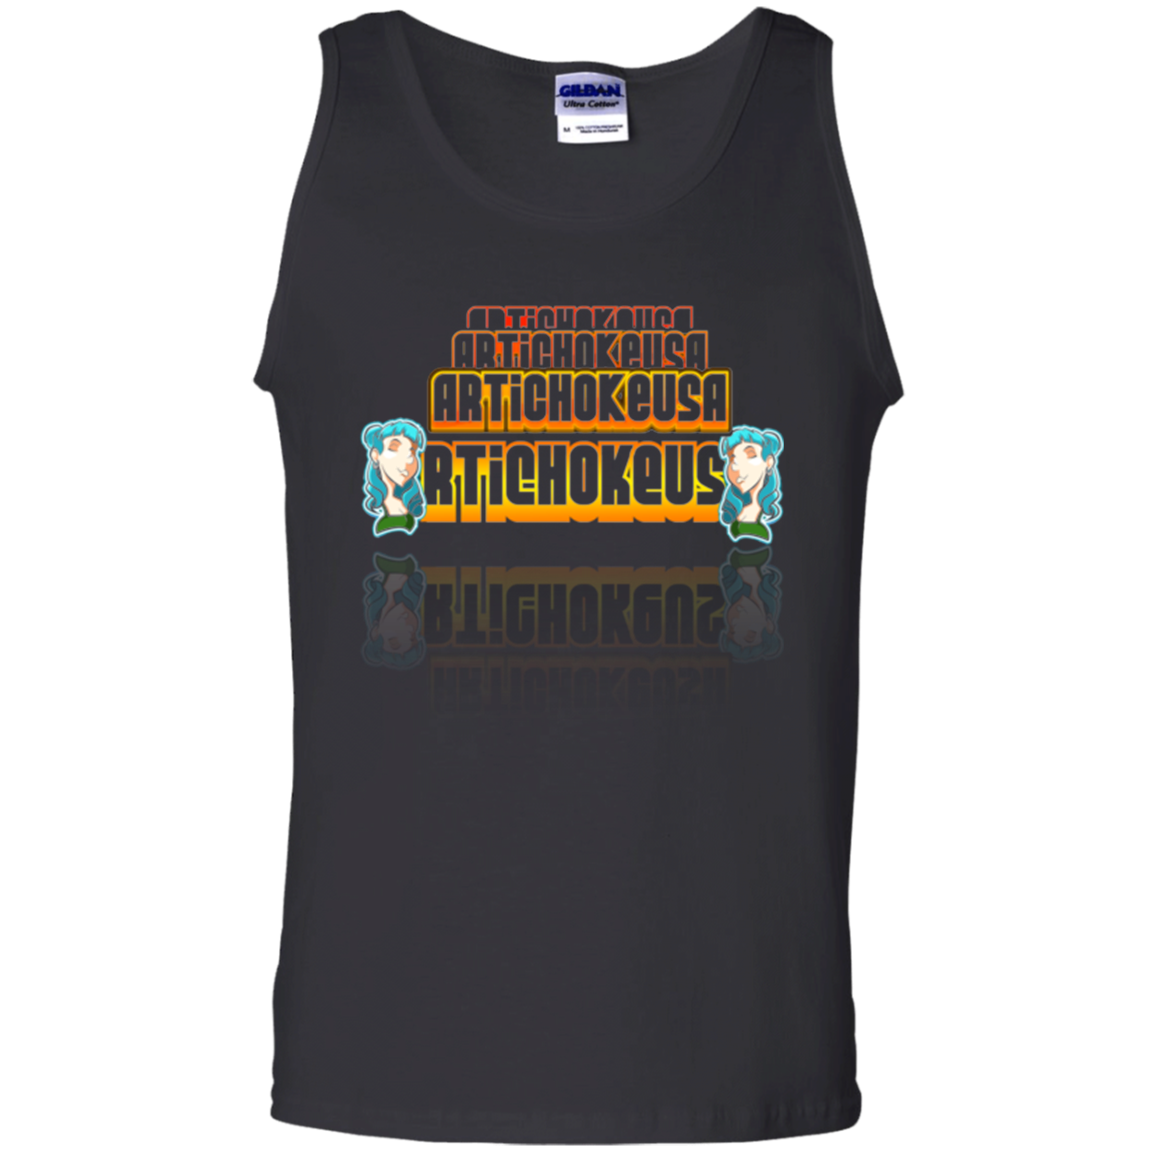 ArtichokeUSA Characters and Fonts. "Shelly" Let’s Create Your Own Design Today. Men's 100% Cotton Tank Top